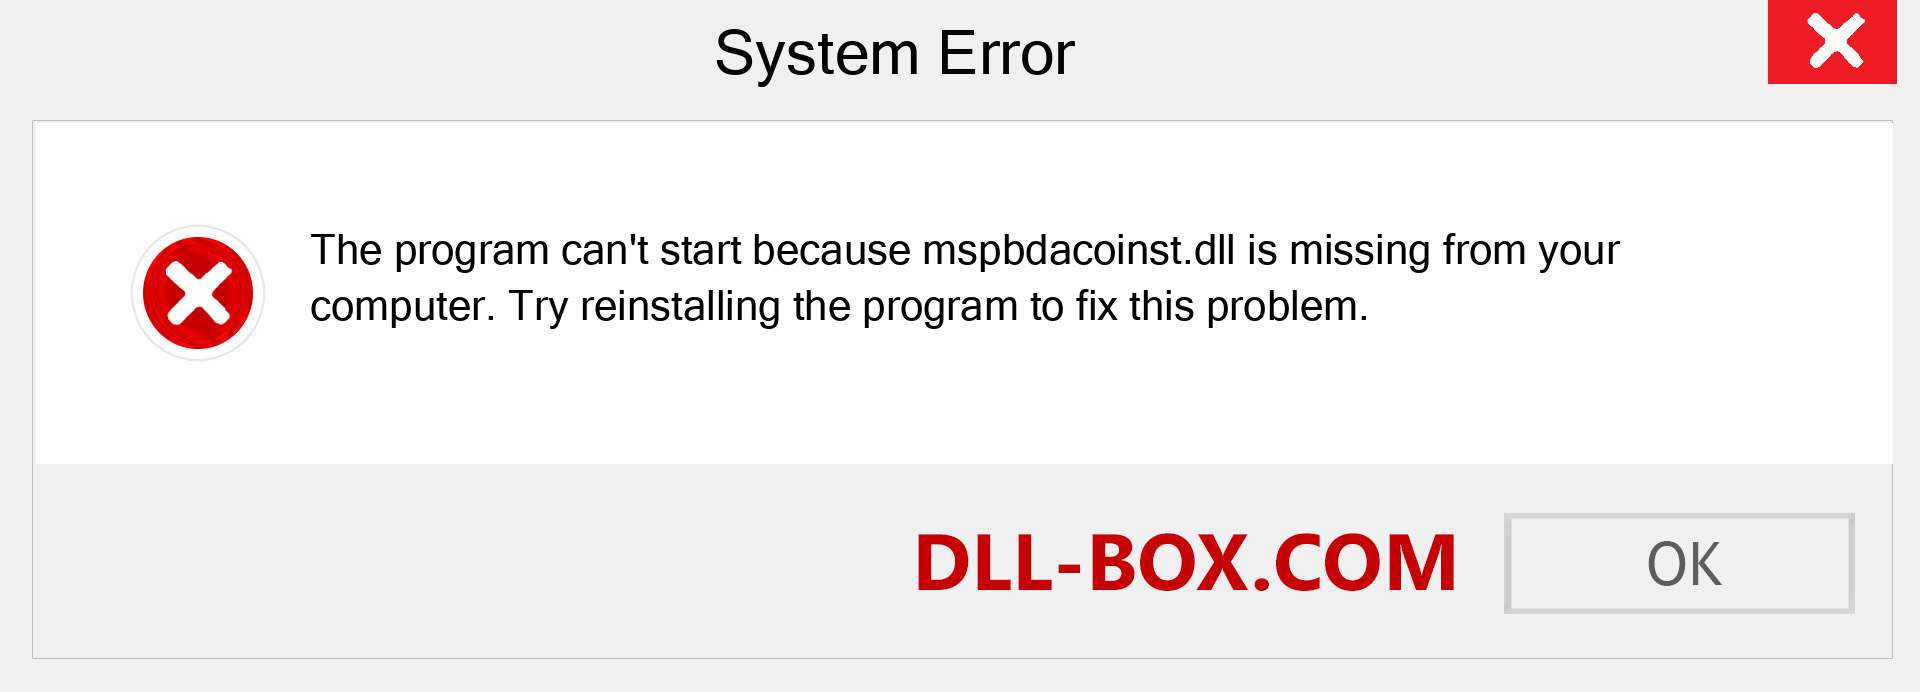  mspbdacoinst.dll file is missing?. Download for Windows 7, 8, 10 - Fix  mspbdacoinst dll Missing Error on Windows, photos, images